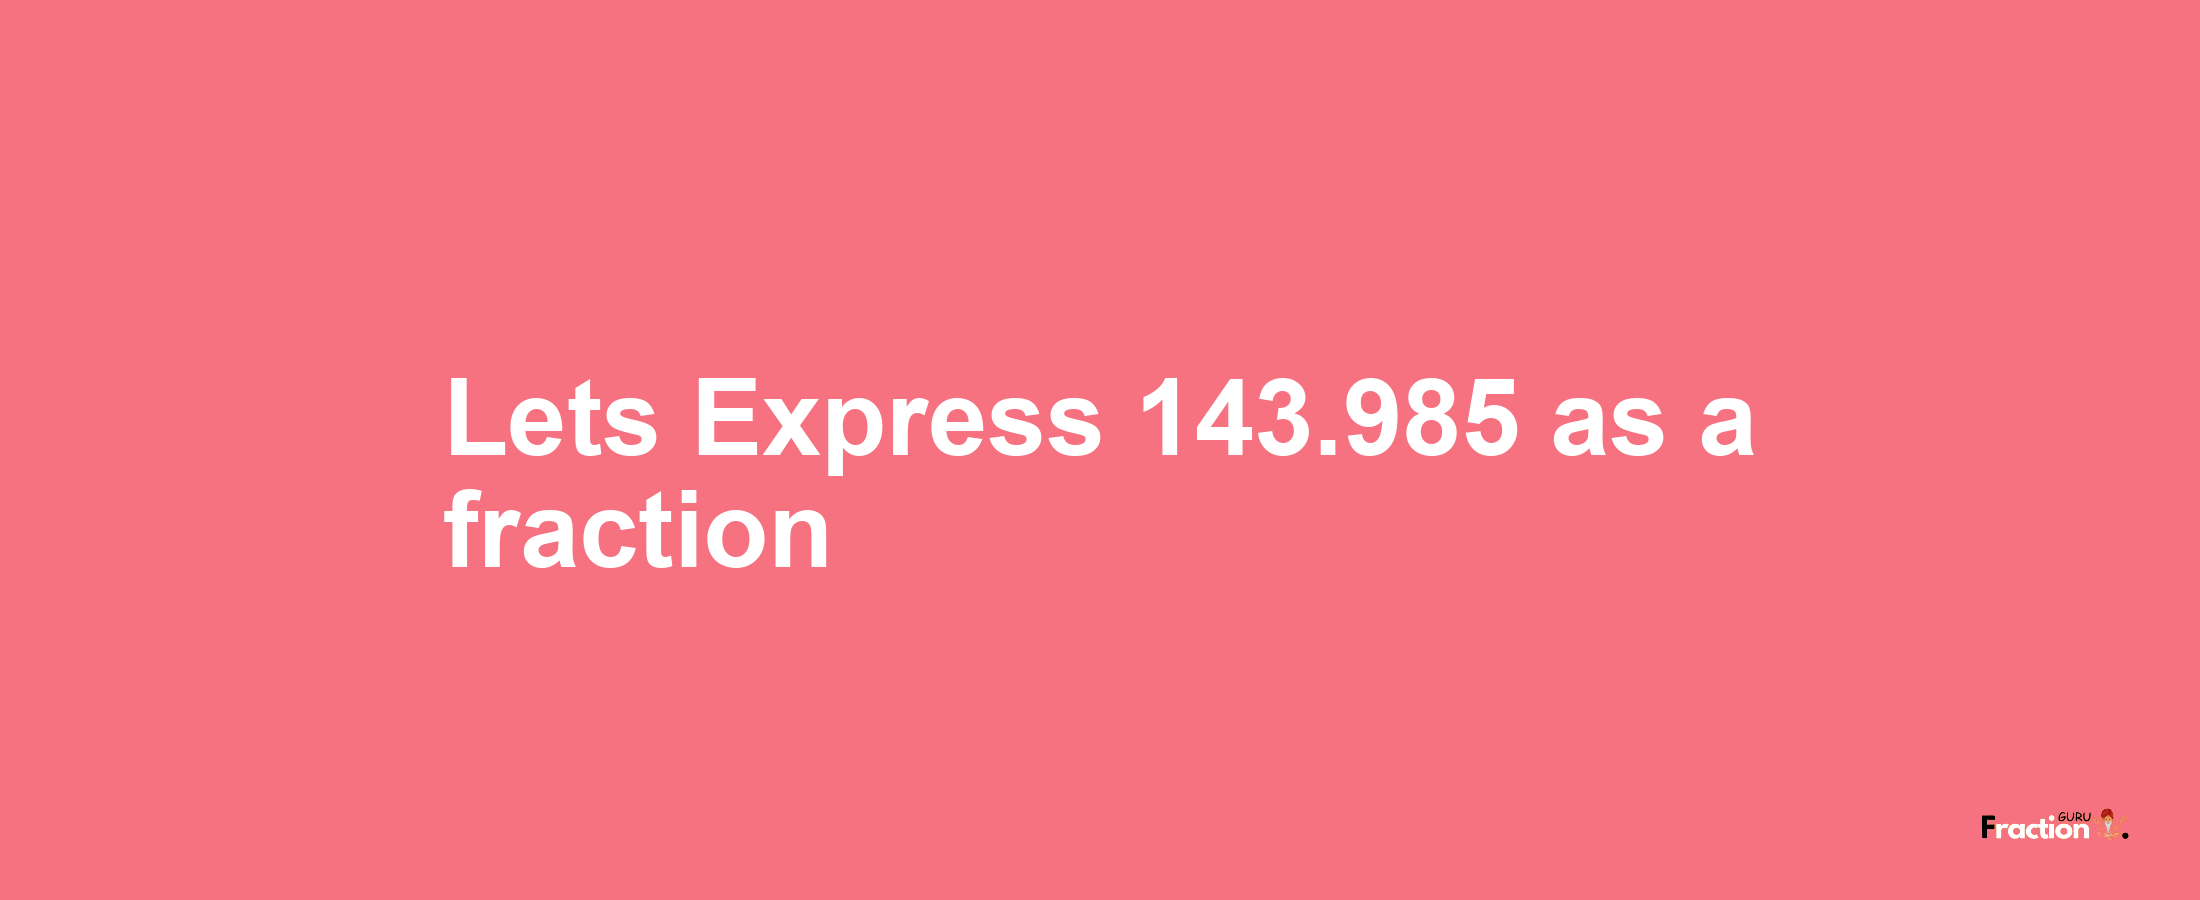 Lets Express 143.985 as afraction